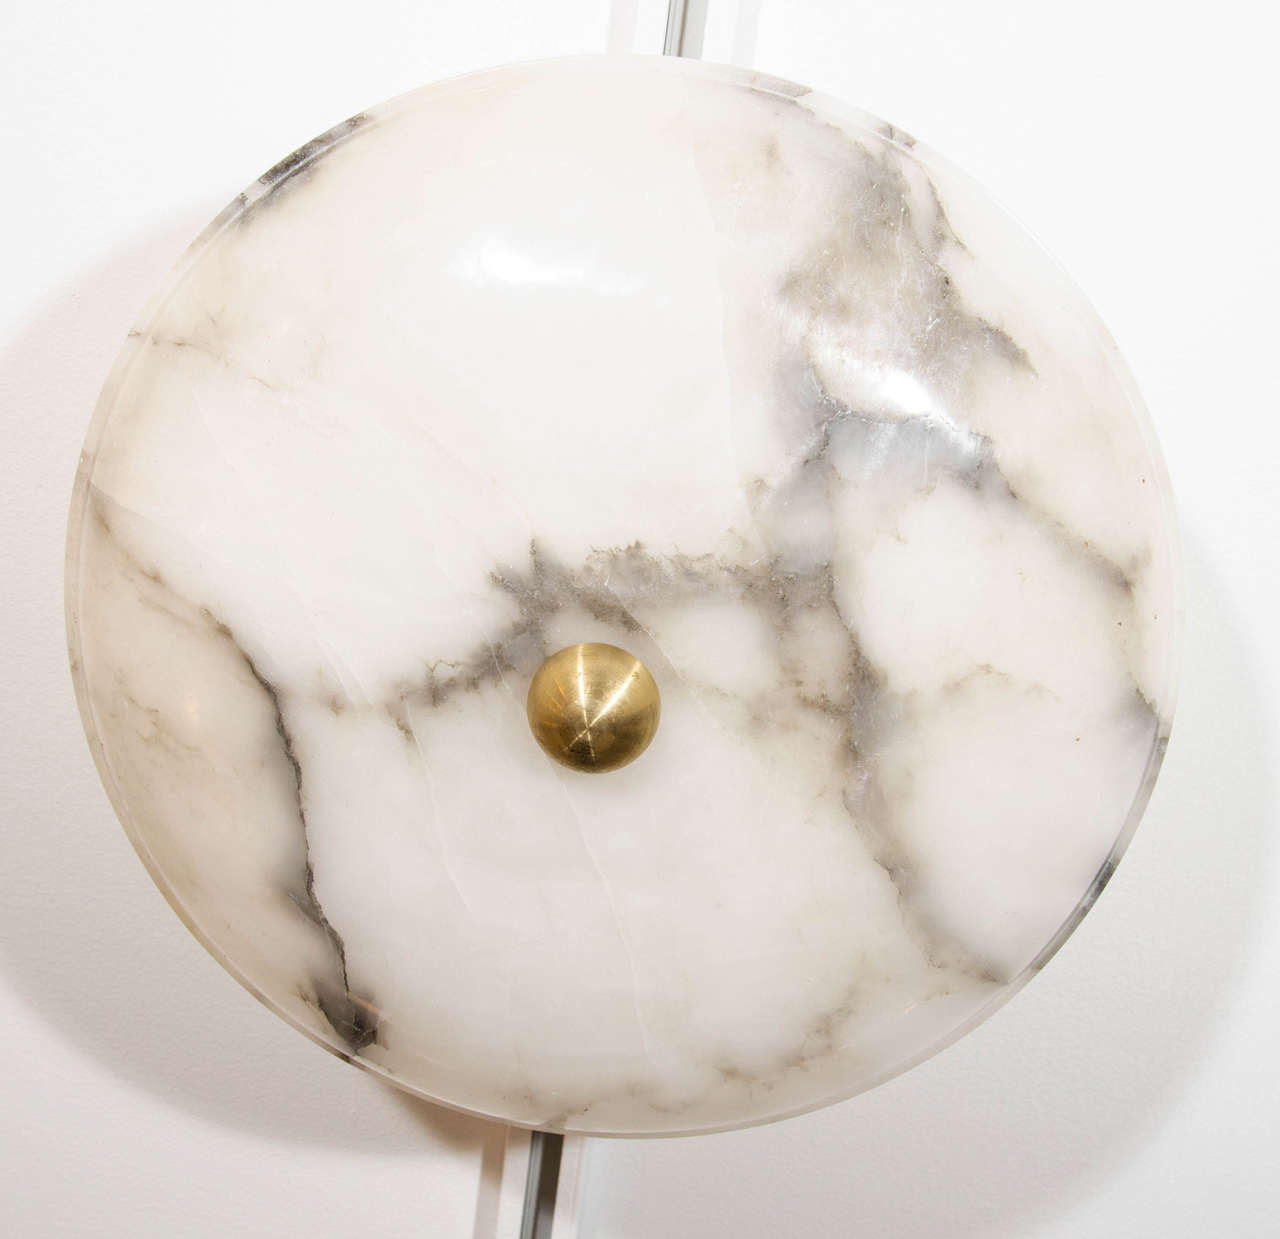 Stormy charcoal mineral veining provide visual interest in this single rimmed ceiling hugging fixture.  A single brass button attaches the alabaster bowl to the working parts of this light.  Recently rewired, the fixture holds three X 40 watt 